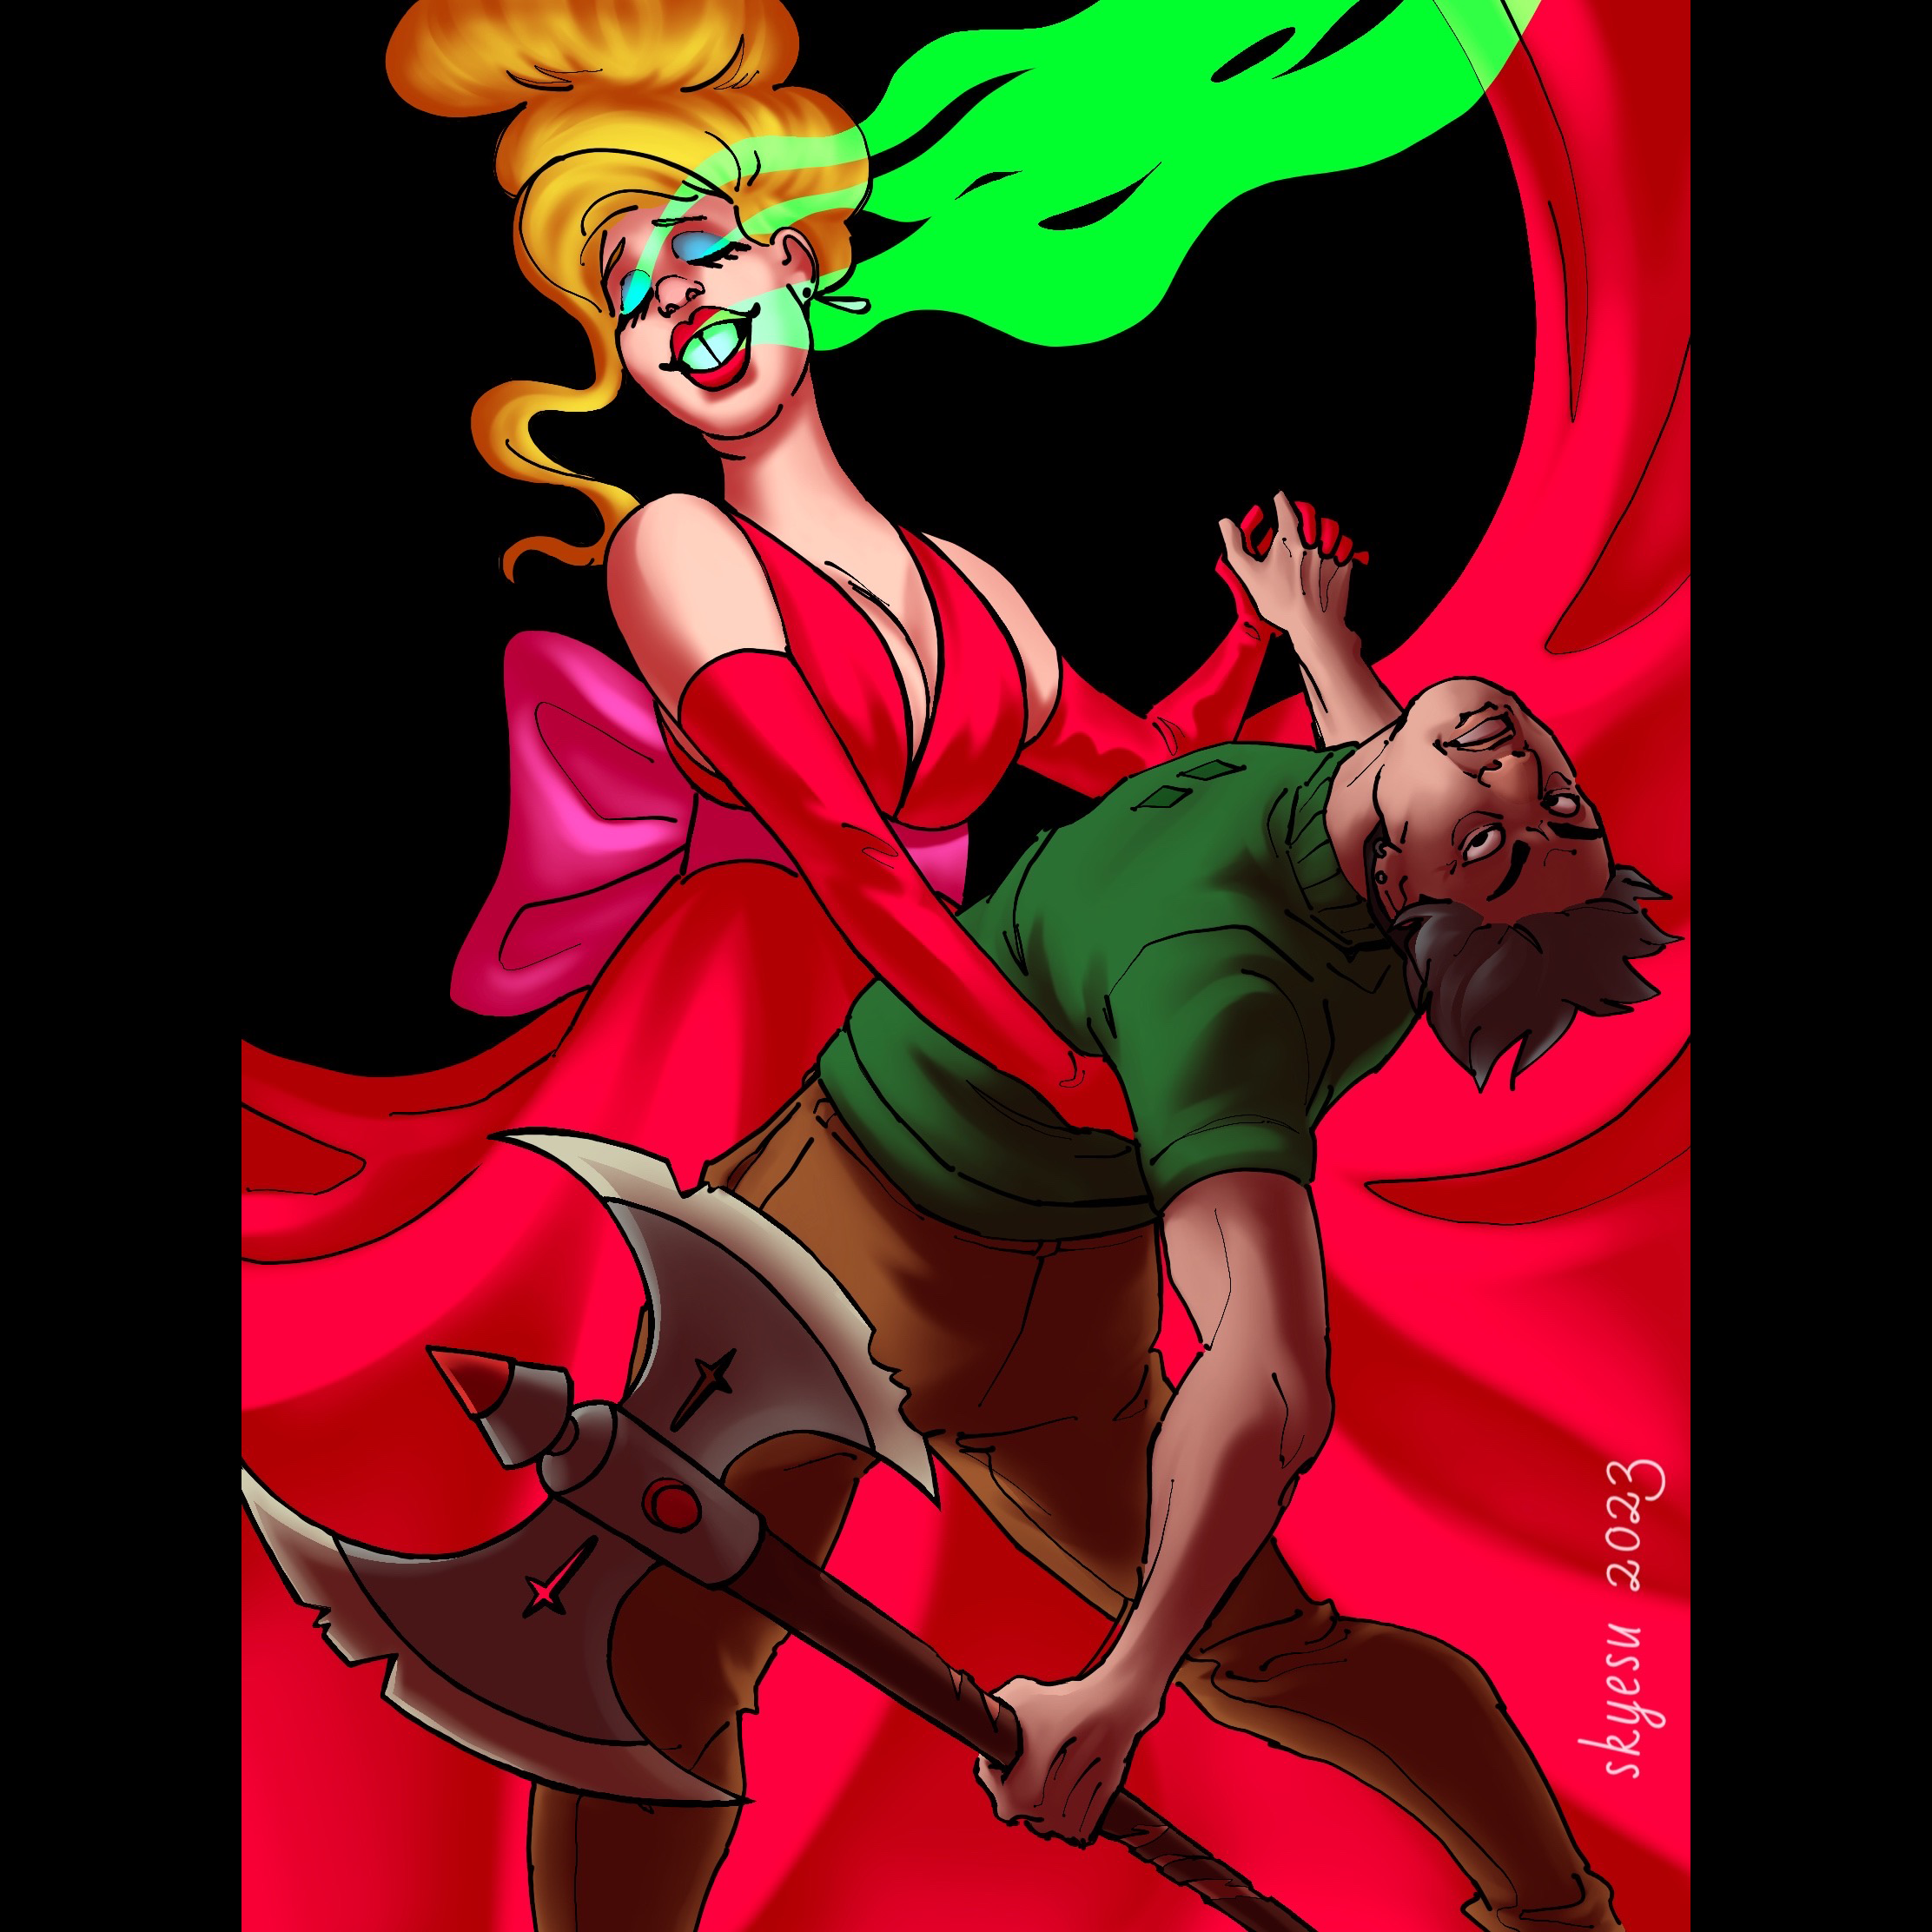 pauline phoenix, a grinning woman in a red dress, and barborah winslow, an angry and frightened woman in a green turtleneck, dancing in front of a black background